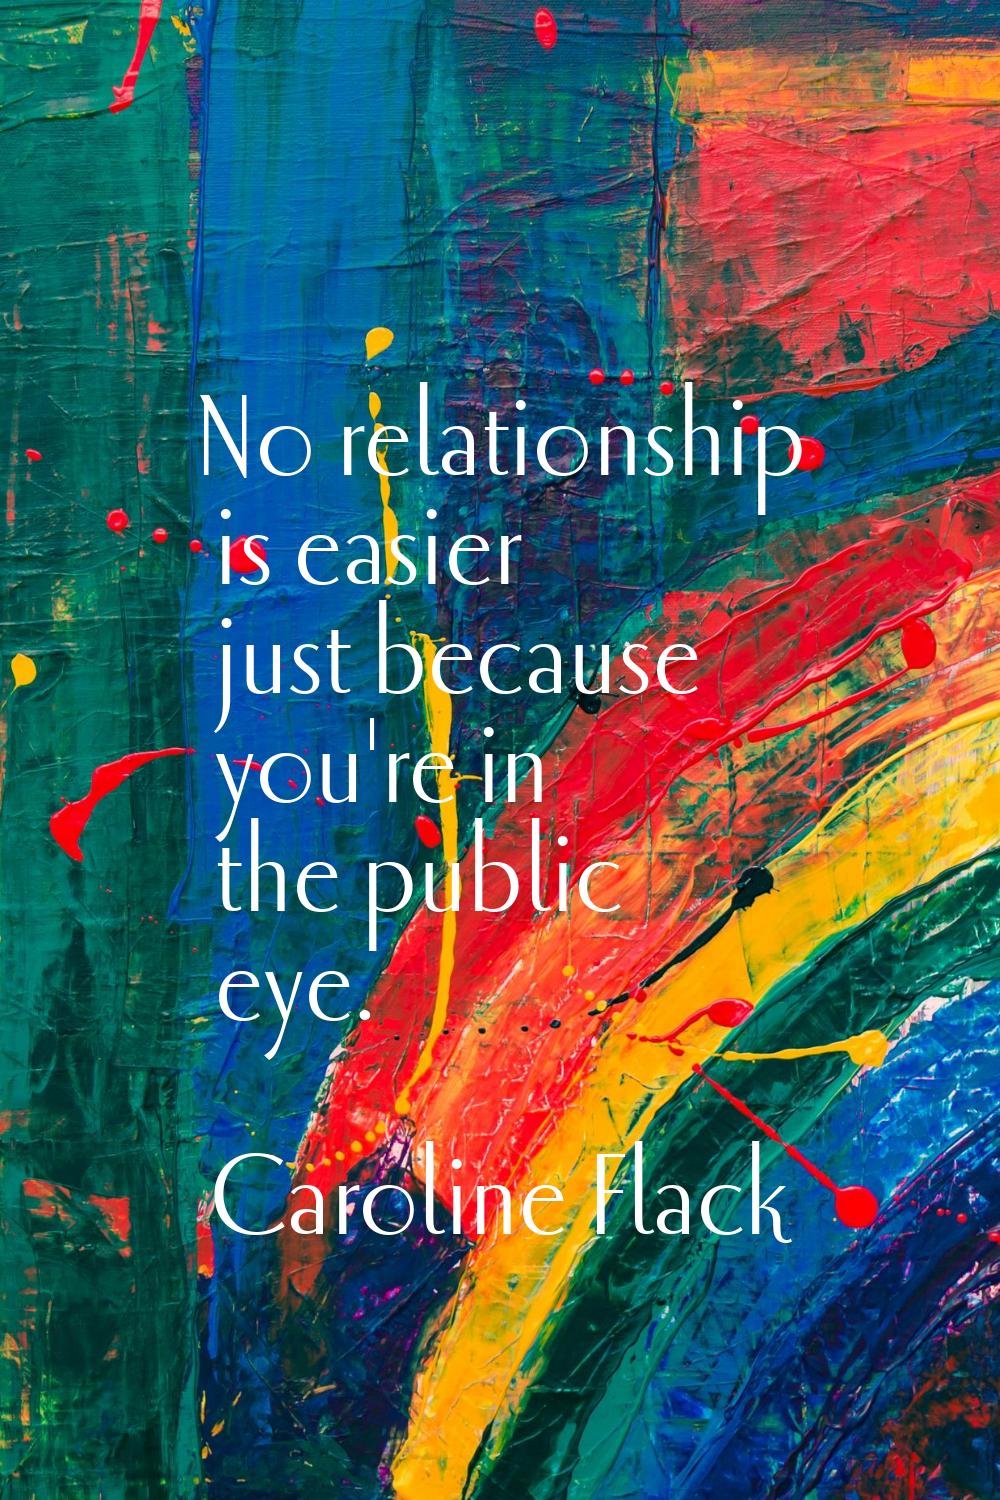 No relationship is easier just because you're in the public eye.